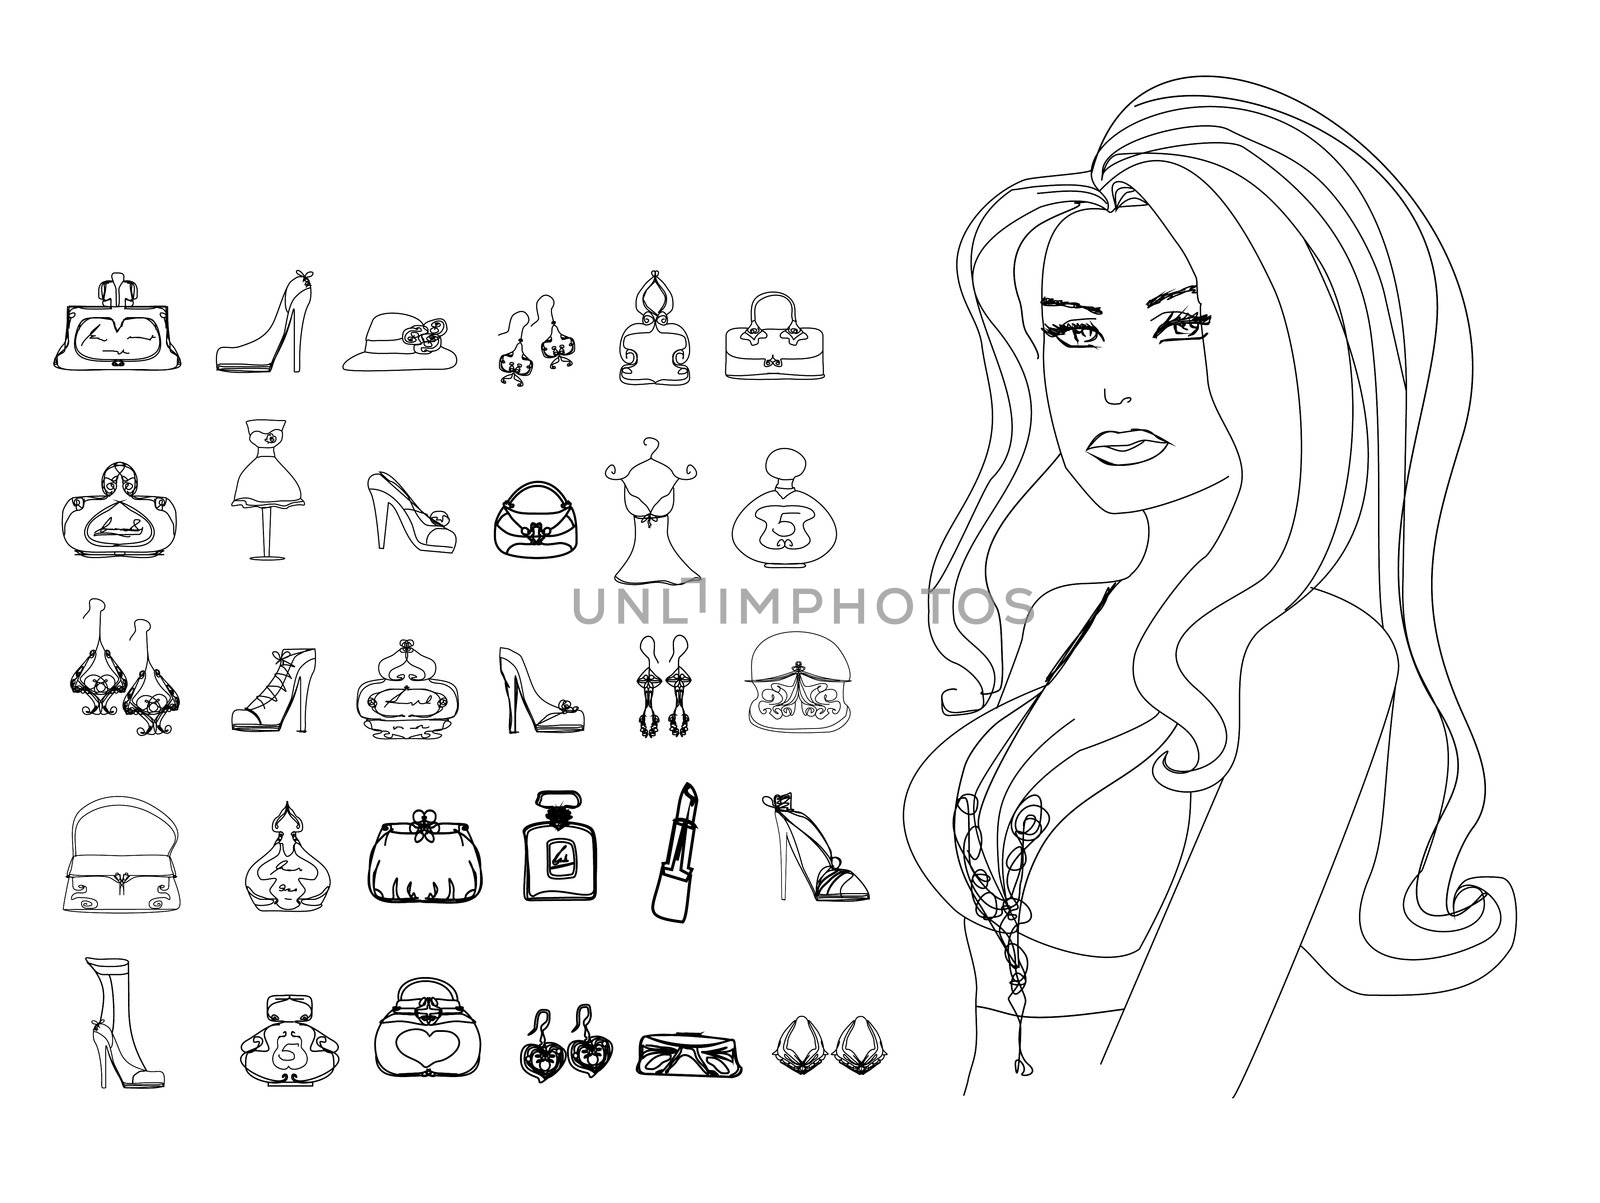 Fashion shopping icon doodle set by JackyBrown